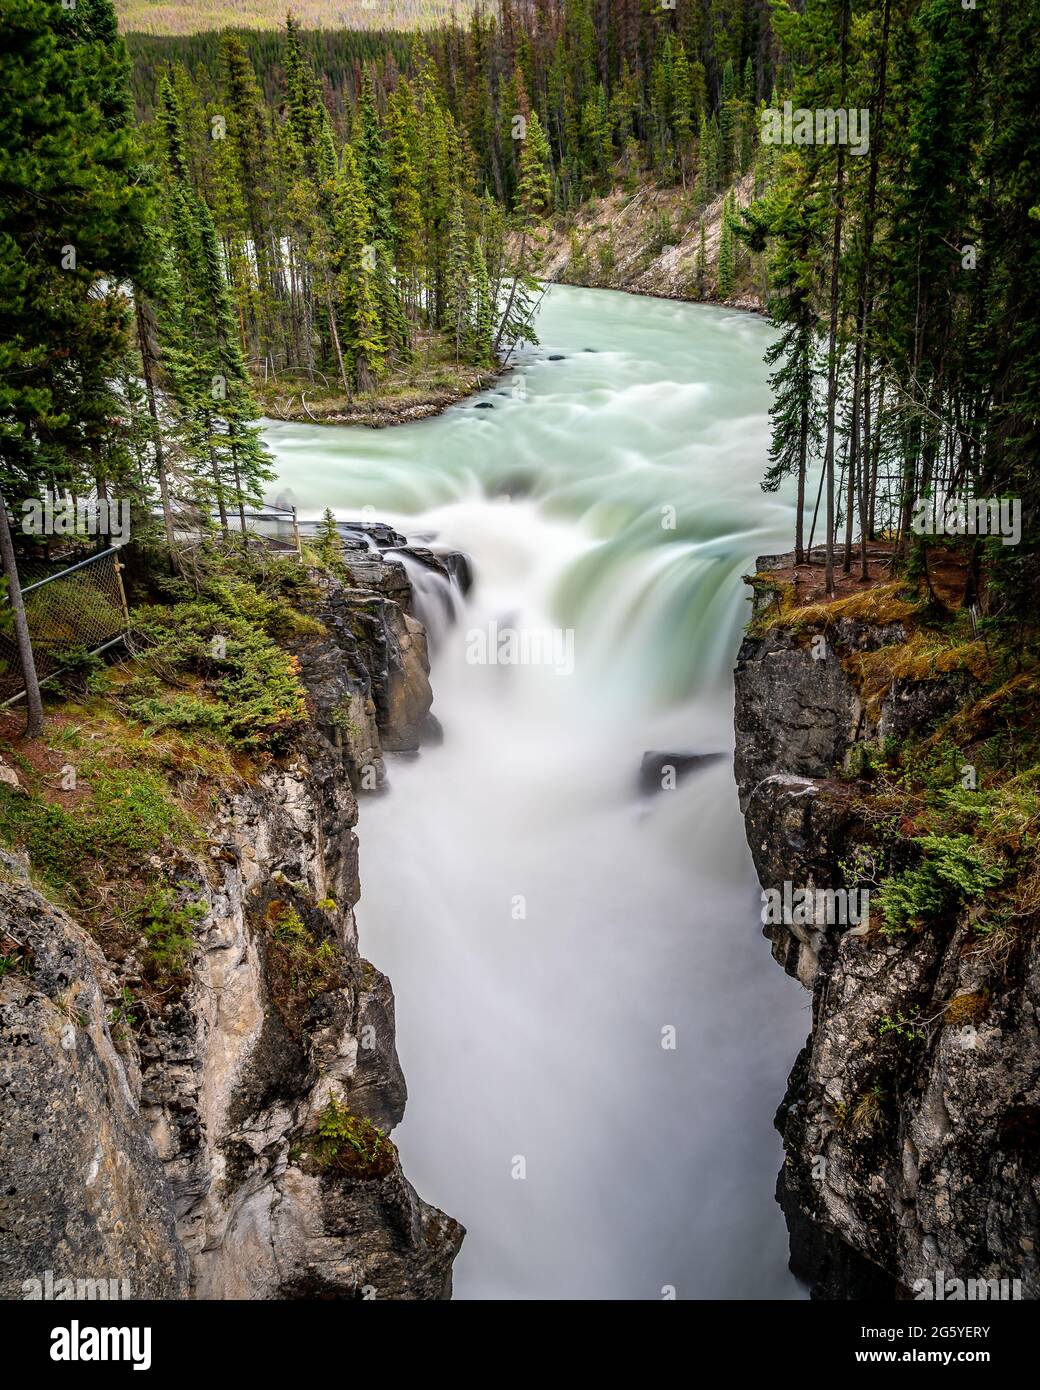 Long Exposure Photo of the turquoise water of the Sunwapta River as it tumbles down Sunwapta Falls in Jasper National Park in the Canadian Rocky Mount Stock Photo